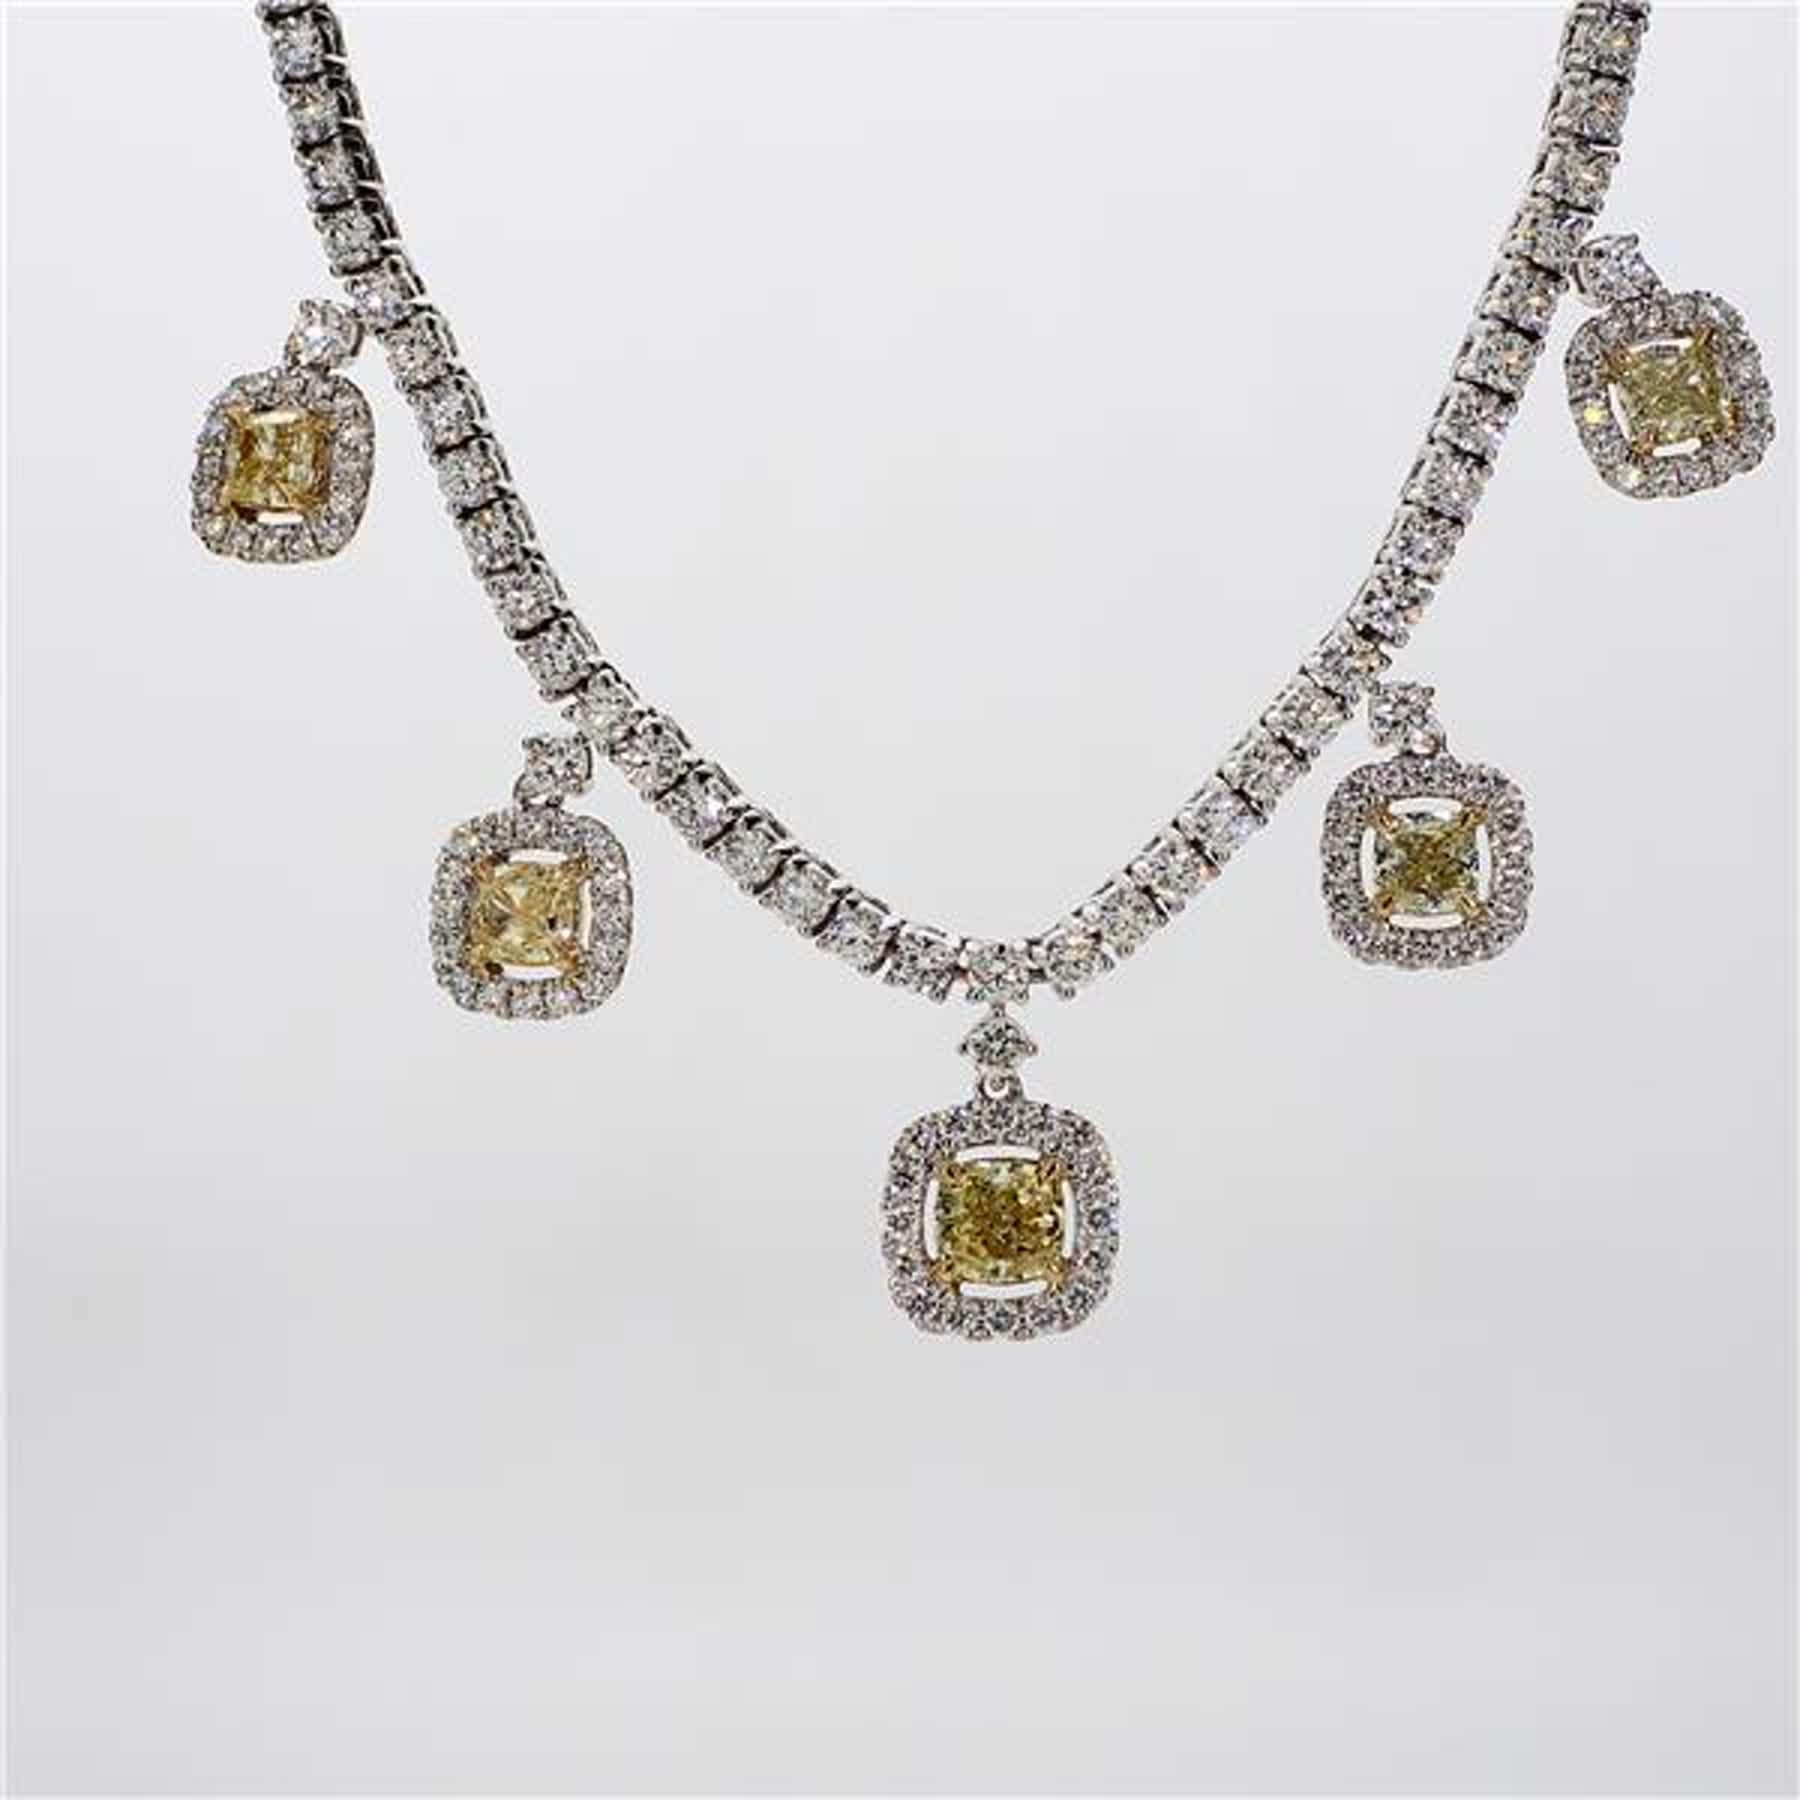 RareGemWorld's classic diamond necklace. Mounted in a beautiful 18K Yellow and White Gold setting with natural cushion cut yellow diamonds. The yellow diamonds are surrounded by small round natural white diamond melee as well as diamonds throughout